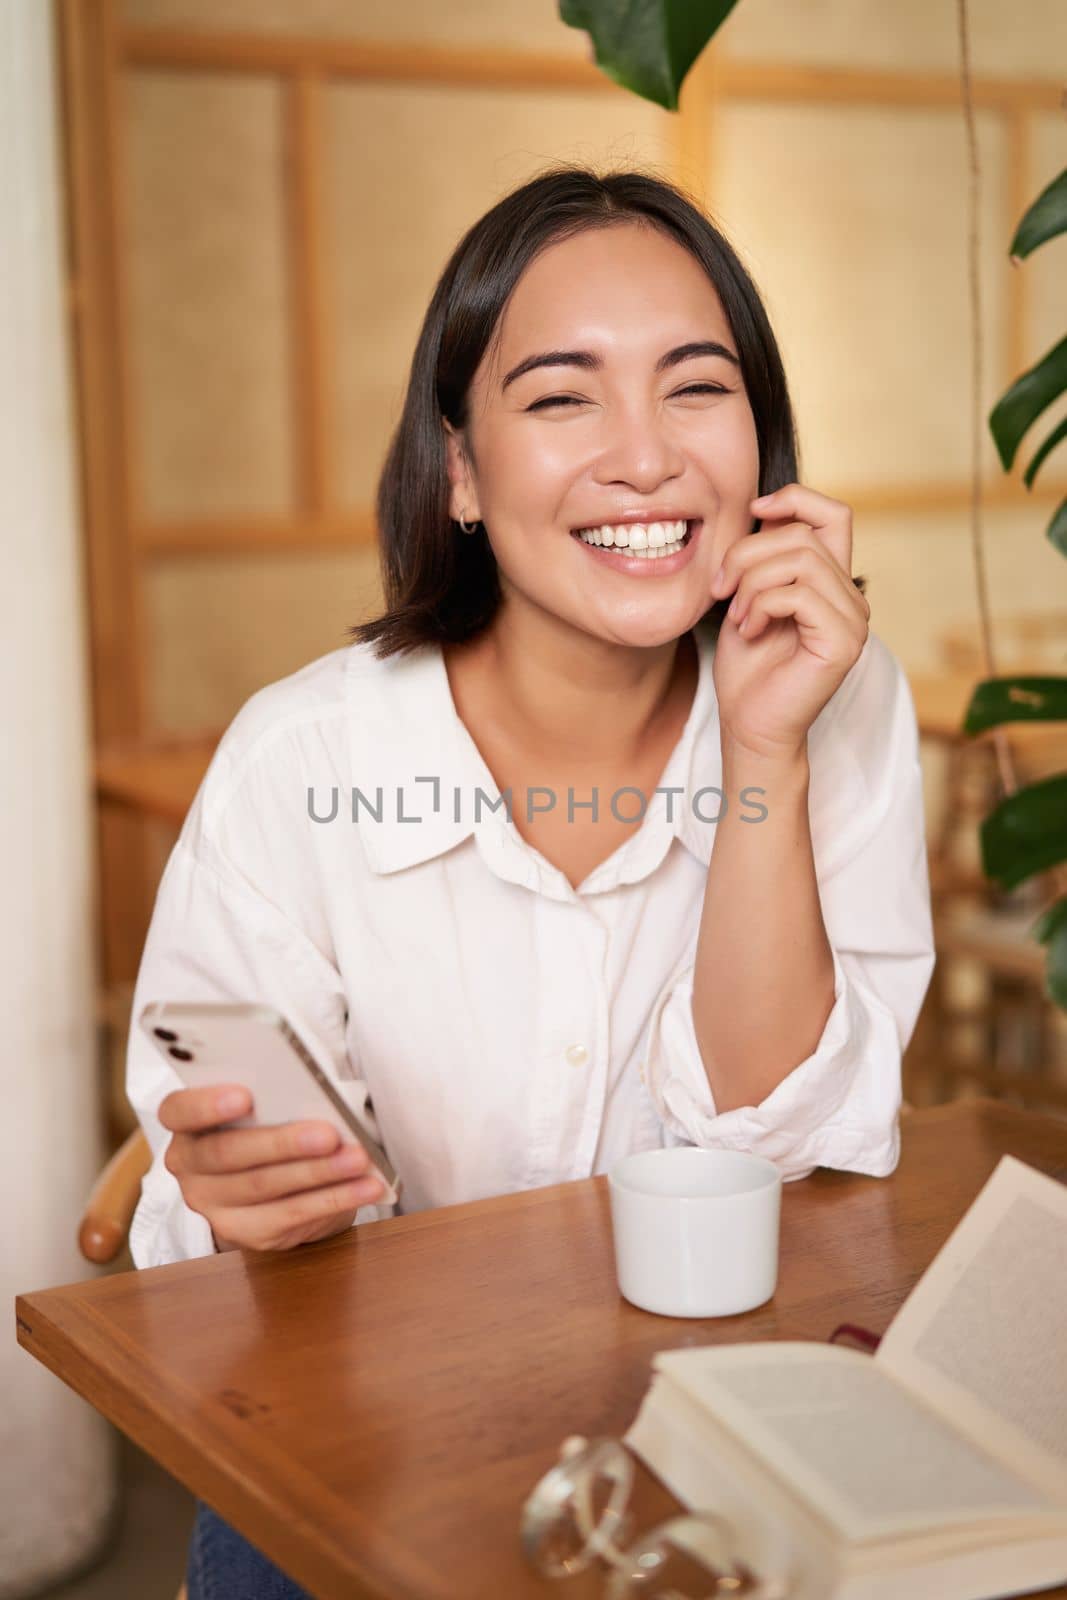 Stylish young woman in cafe with coffee, holding mobile phone, laughing and smiling. Lifestyle and people concept.